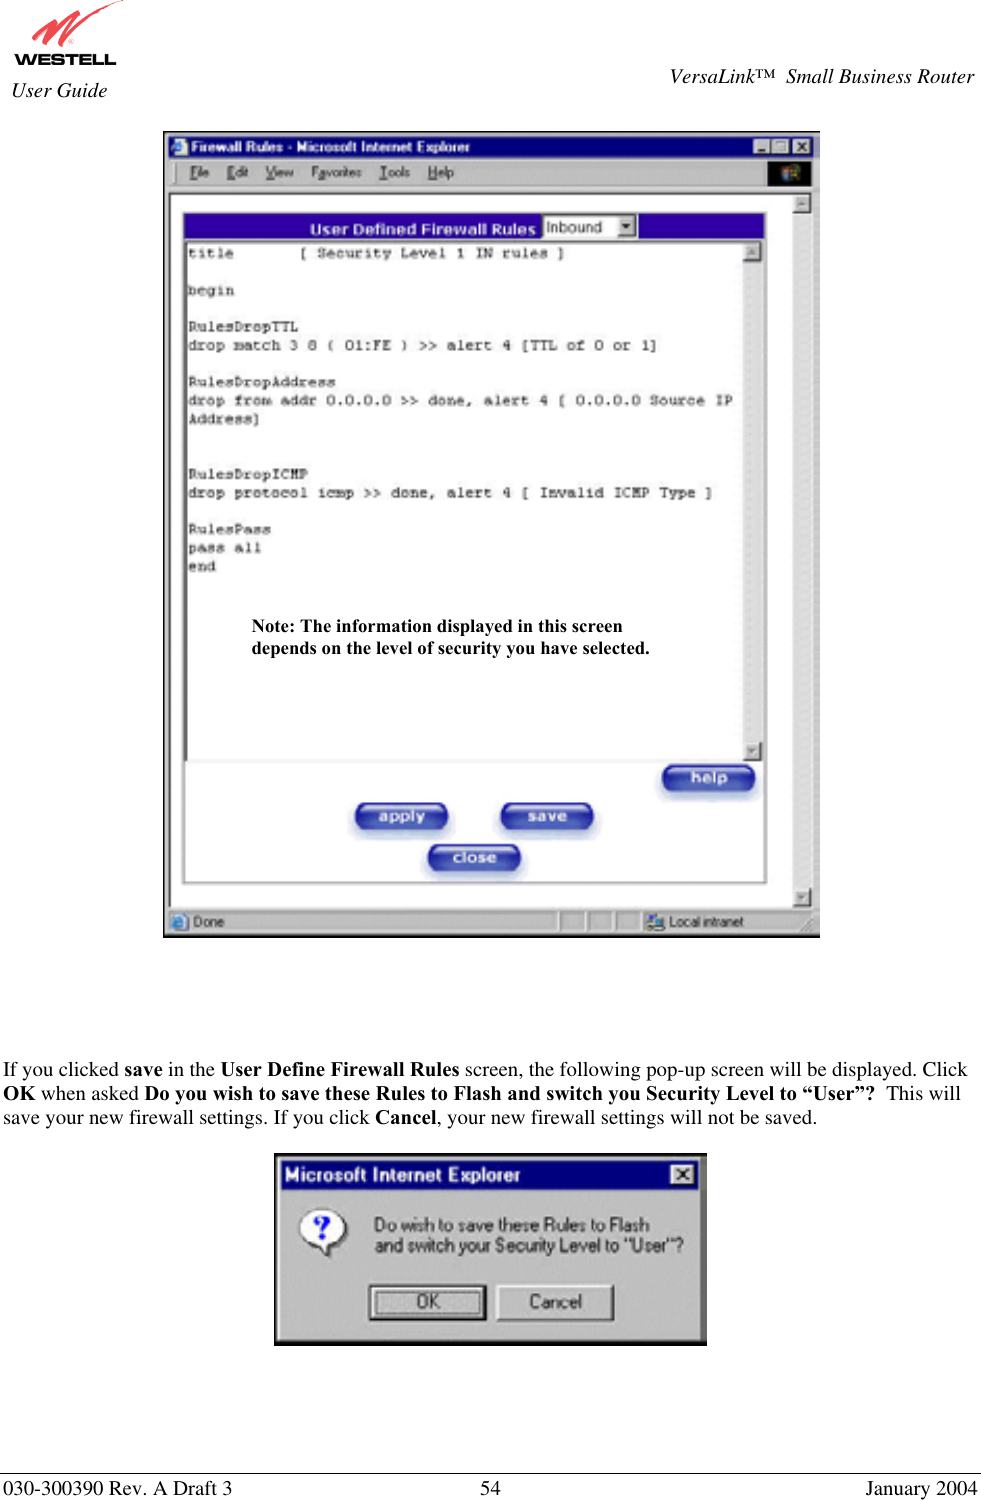       030-300390 Rev. A Draft 3  54  January 2004  VersaLink™  Small Business Router  User Guide        If you clicked save in the User Define Firewall Rules screen, the following pop-up screen will be displayed. Click OK when asked Do you wish to save these Rules to Flash and switch you Security Level to “User”?  This will save your new firewall settings. If you click Cancel, your new firewall settings will not be saved.        Note: The information displayed in this screen depends on the level of security you have selected. 